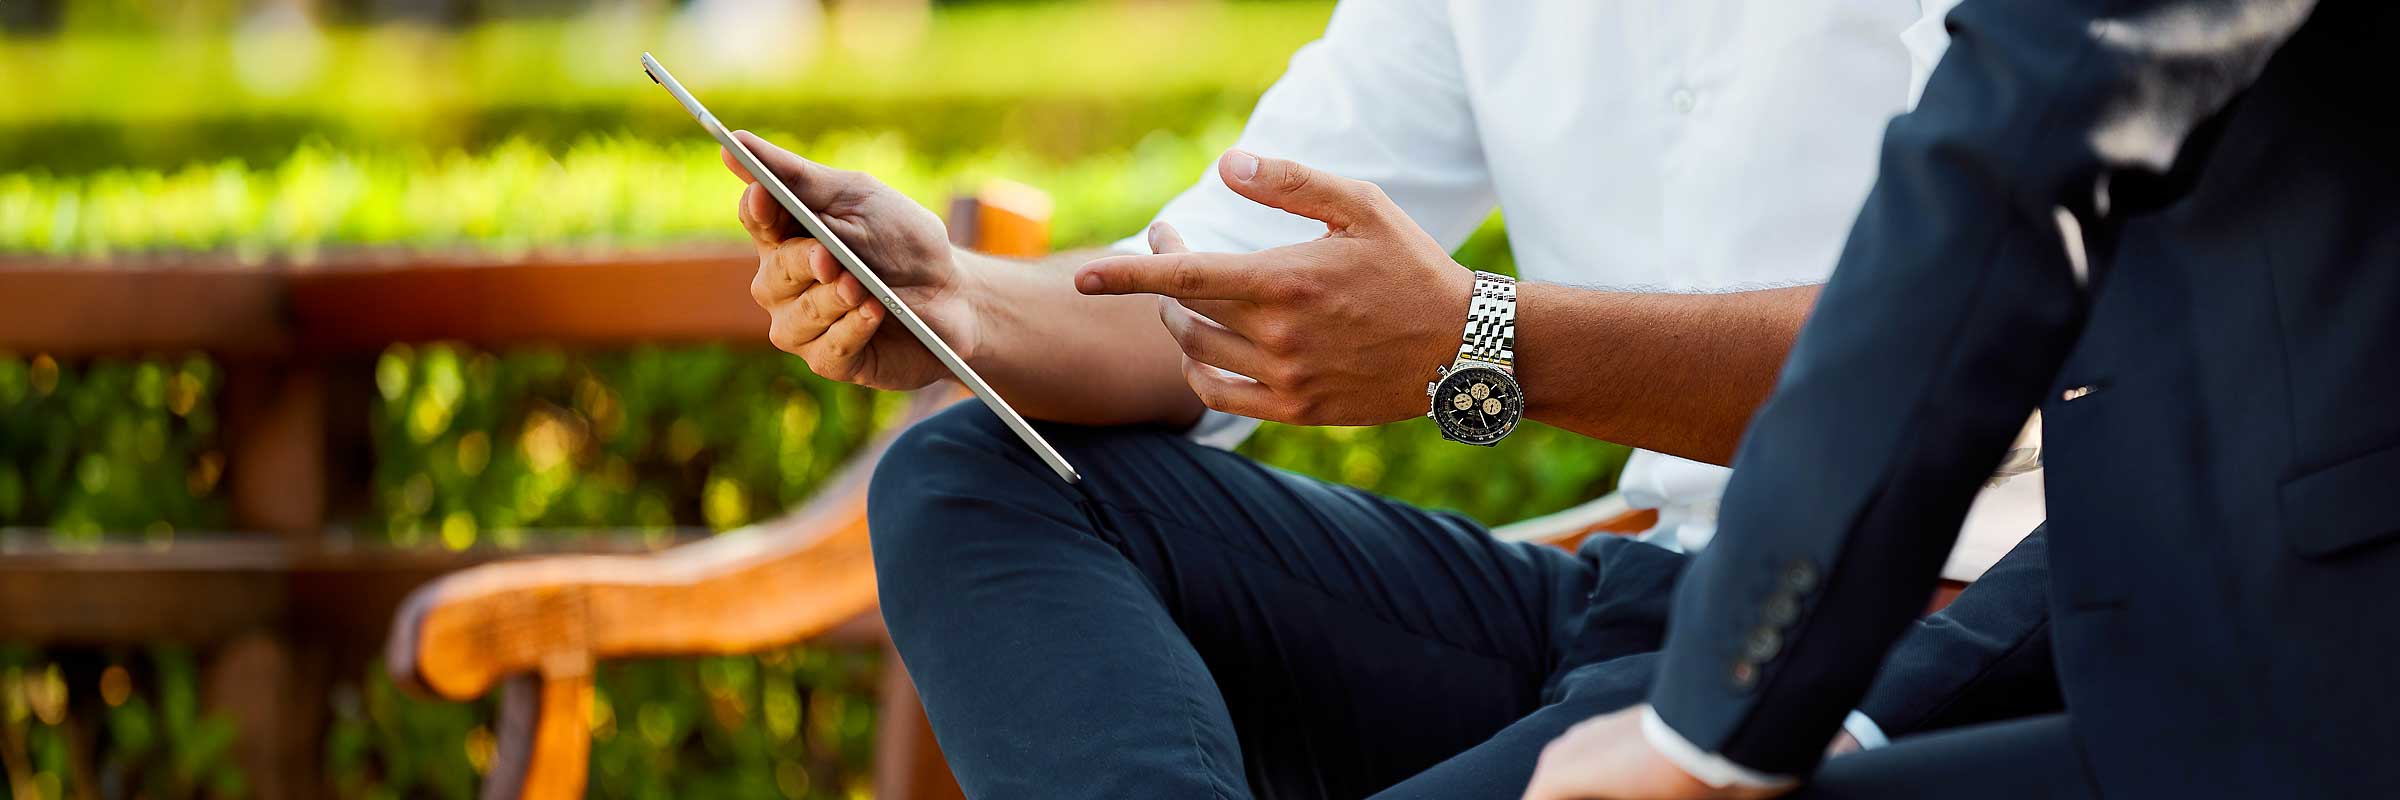 Two businessmen on a park bench reviewing financial information on a tablet